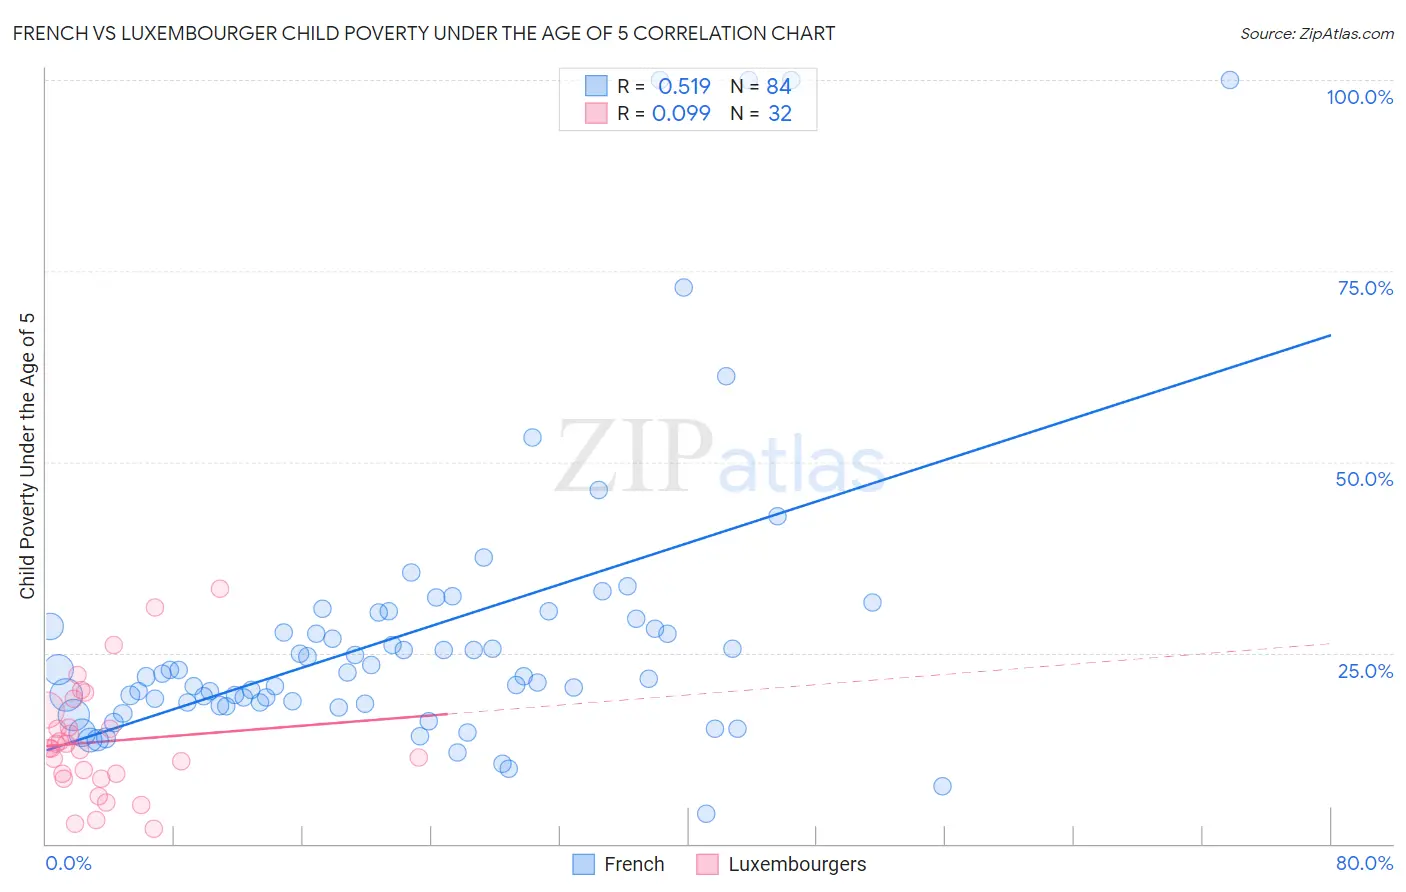 French vs Luxembourger Child Poverty Under the Age of 5